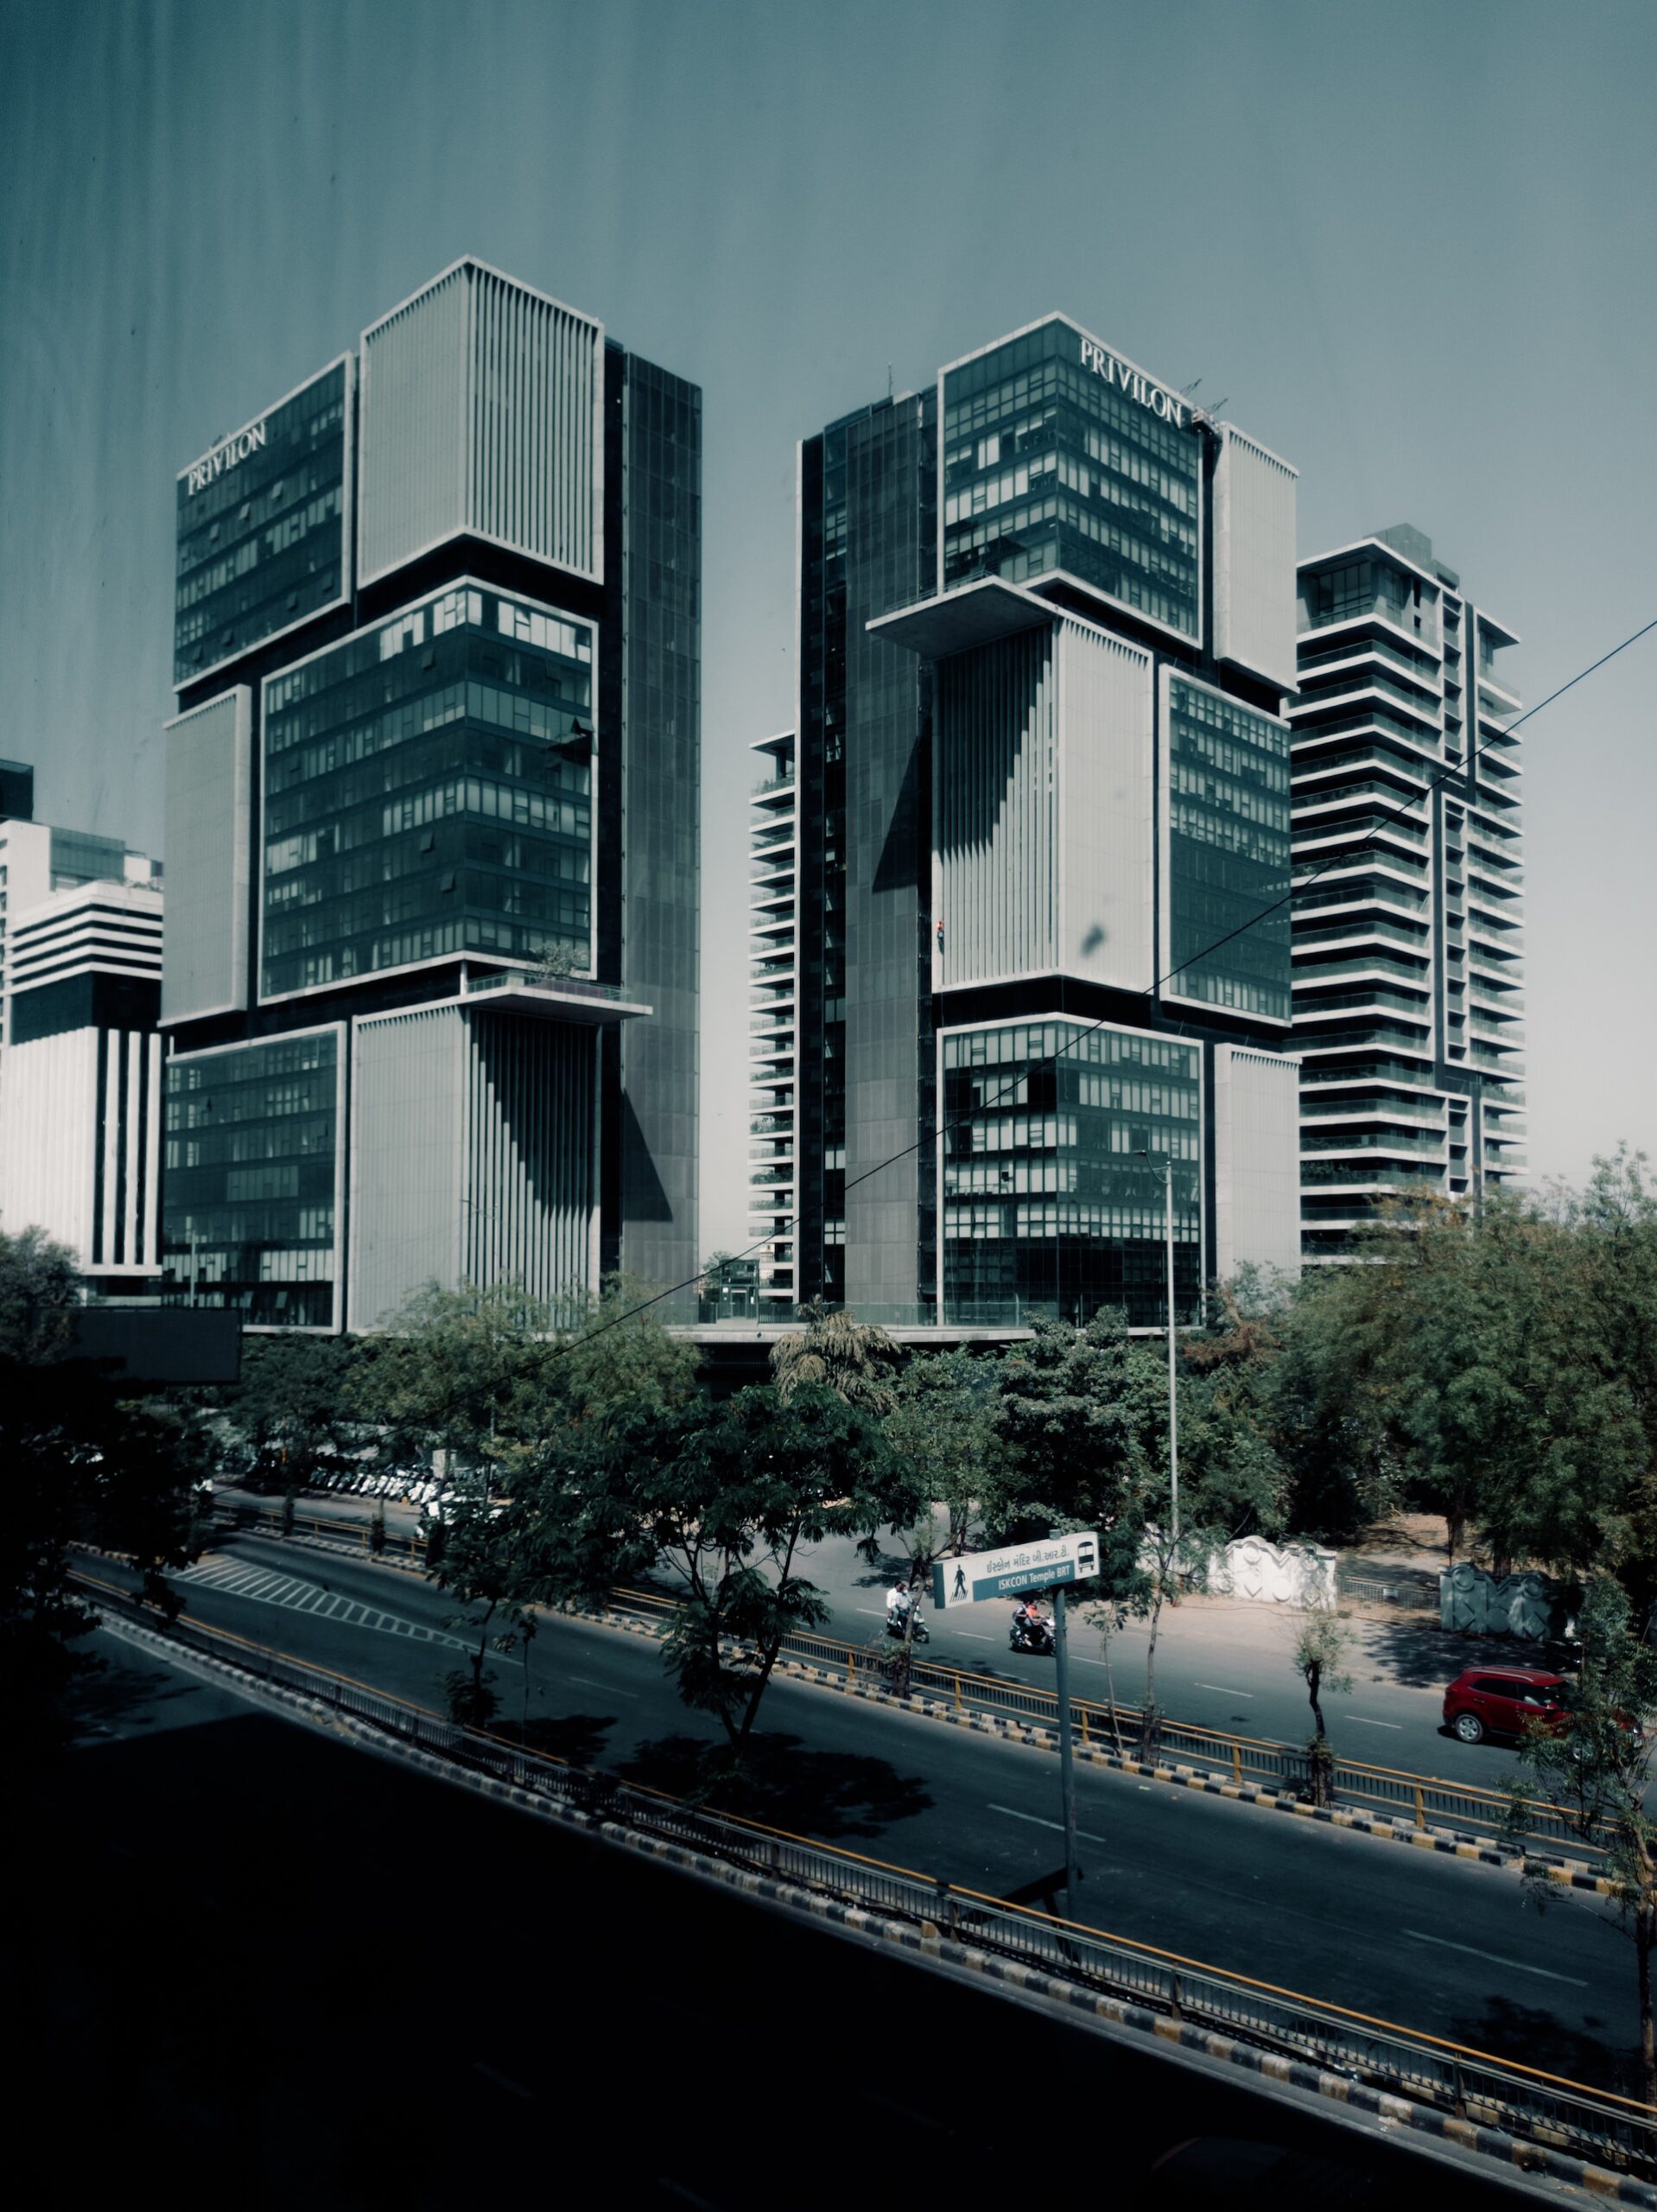 Ahmedabad city in India